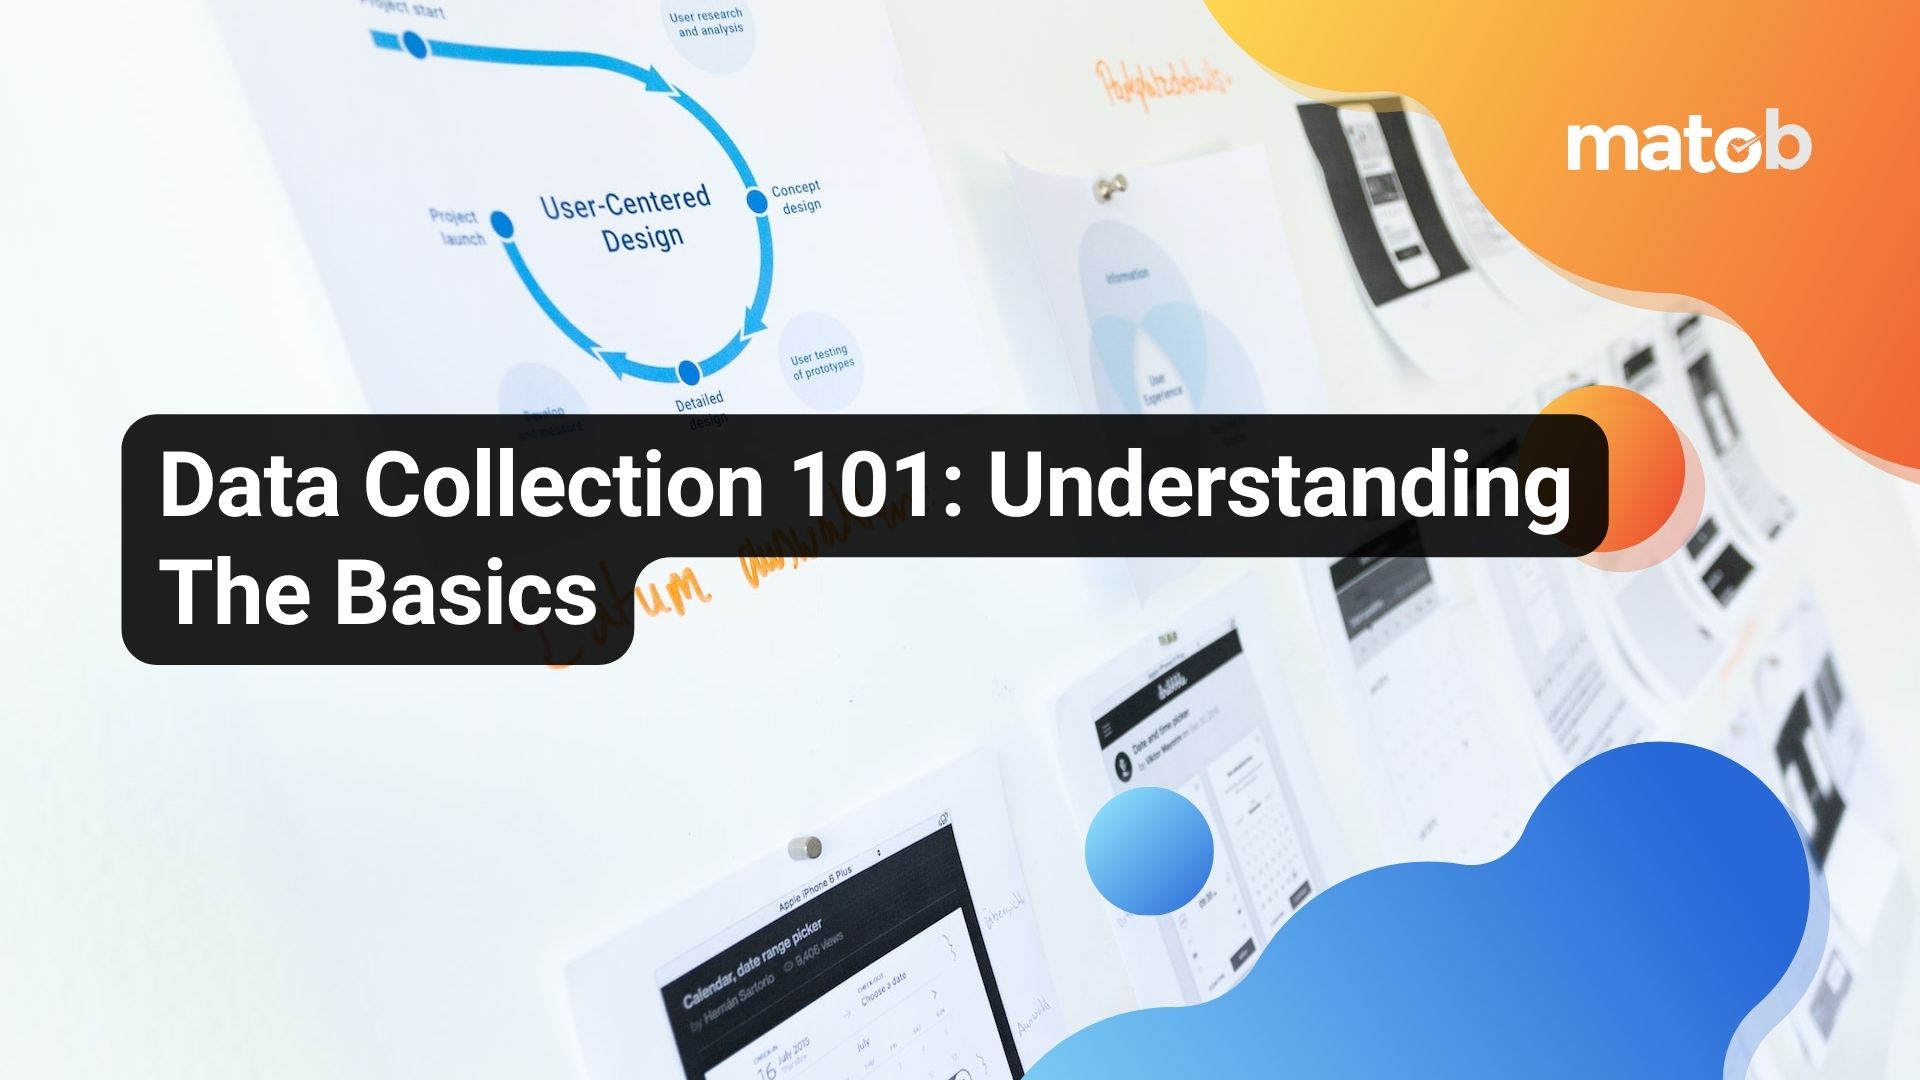 Data Collection 101: Understanding The Basics